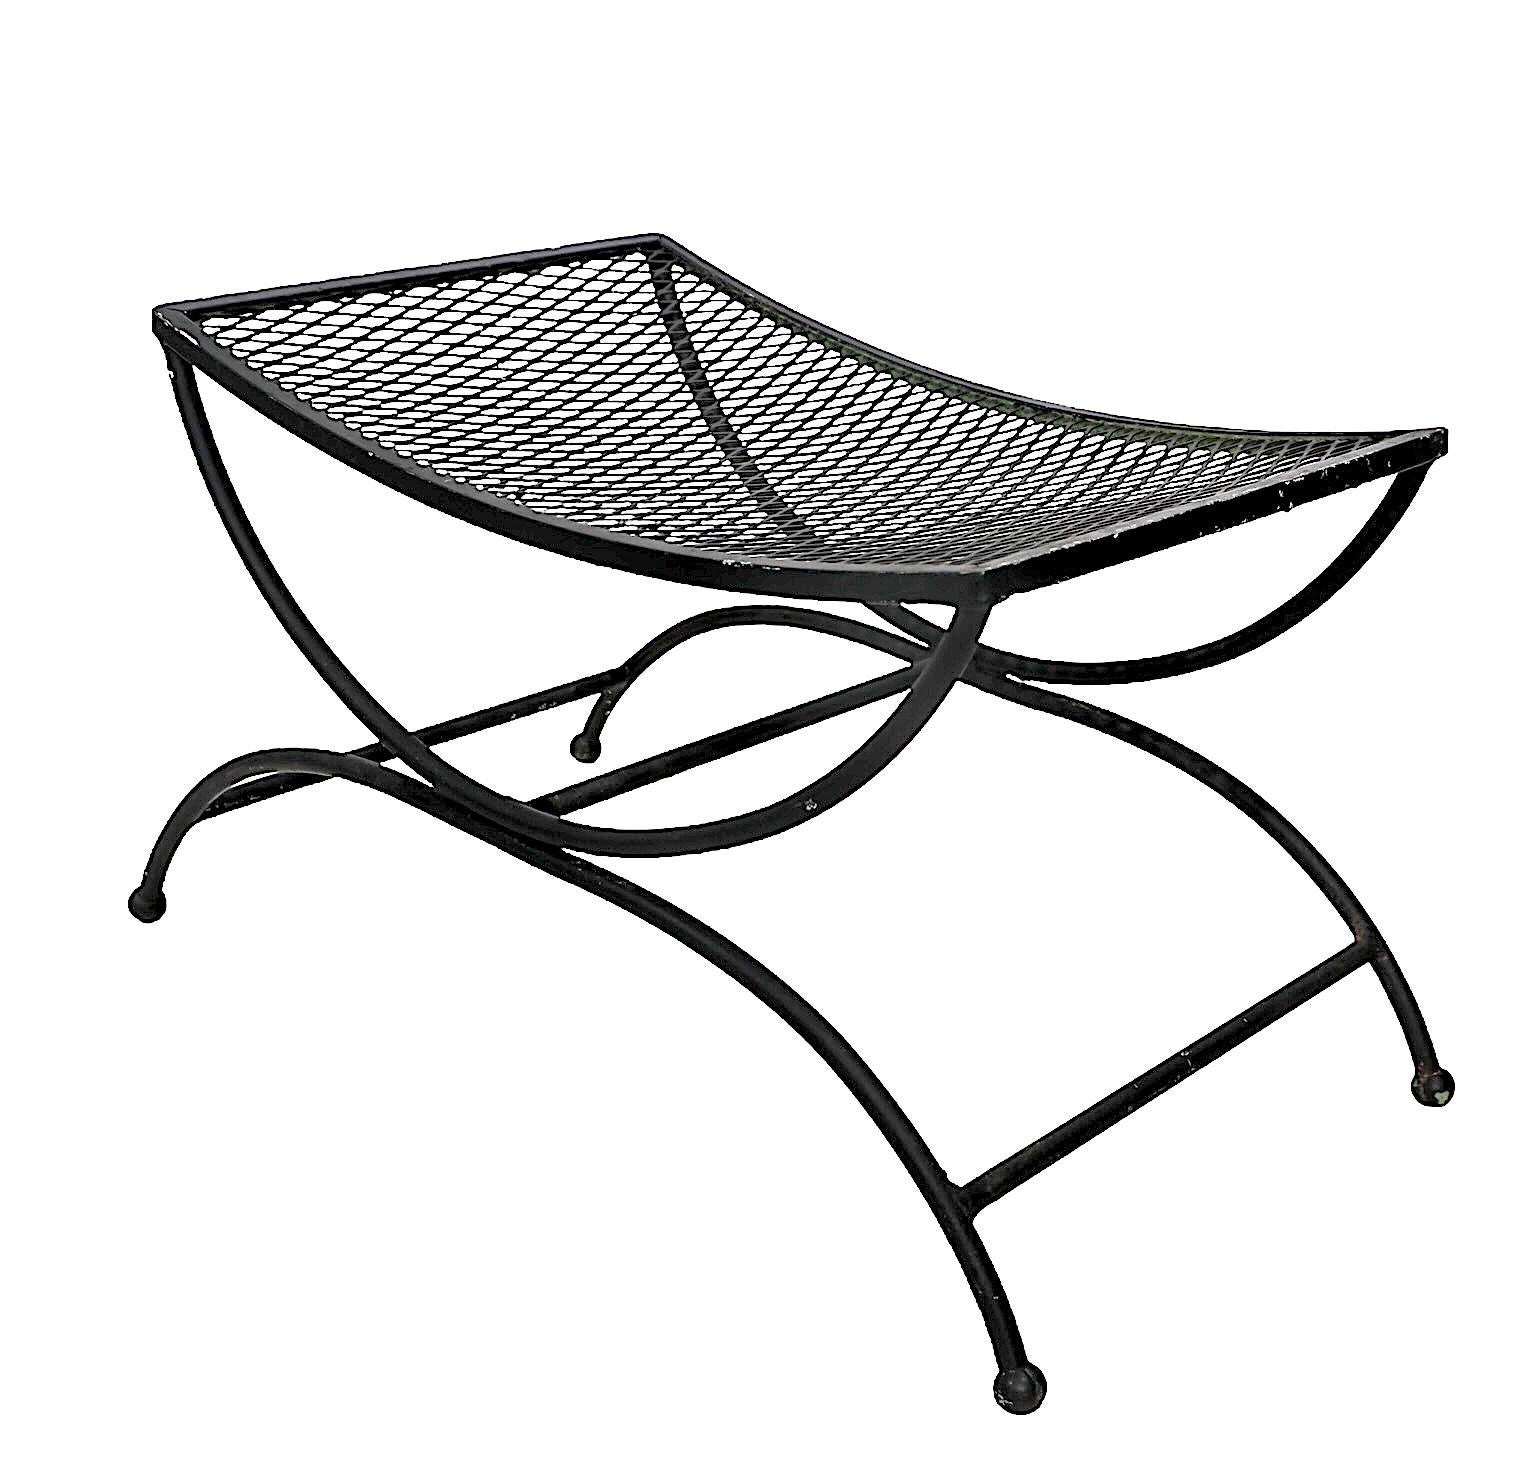 Unusual saddle seat form bench, stool, ottoman by Woodard. Constructed of tubular metal with a curved metal mesh seat rest - Suitable for both indoor and outdoor use. This chic bench is in good original condition, structurally sound and sturdy, 